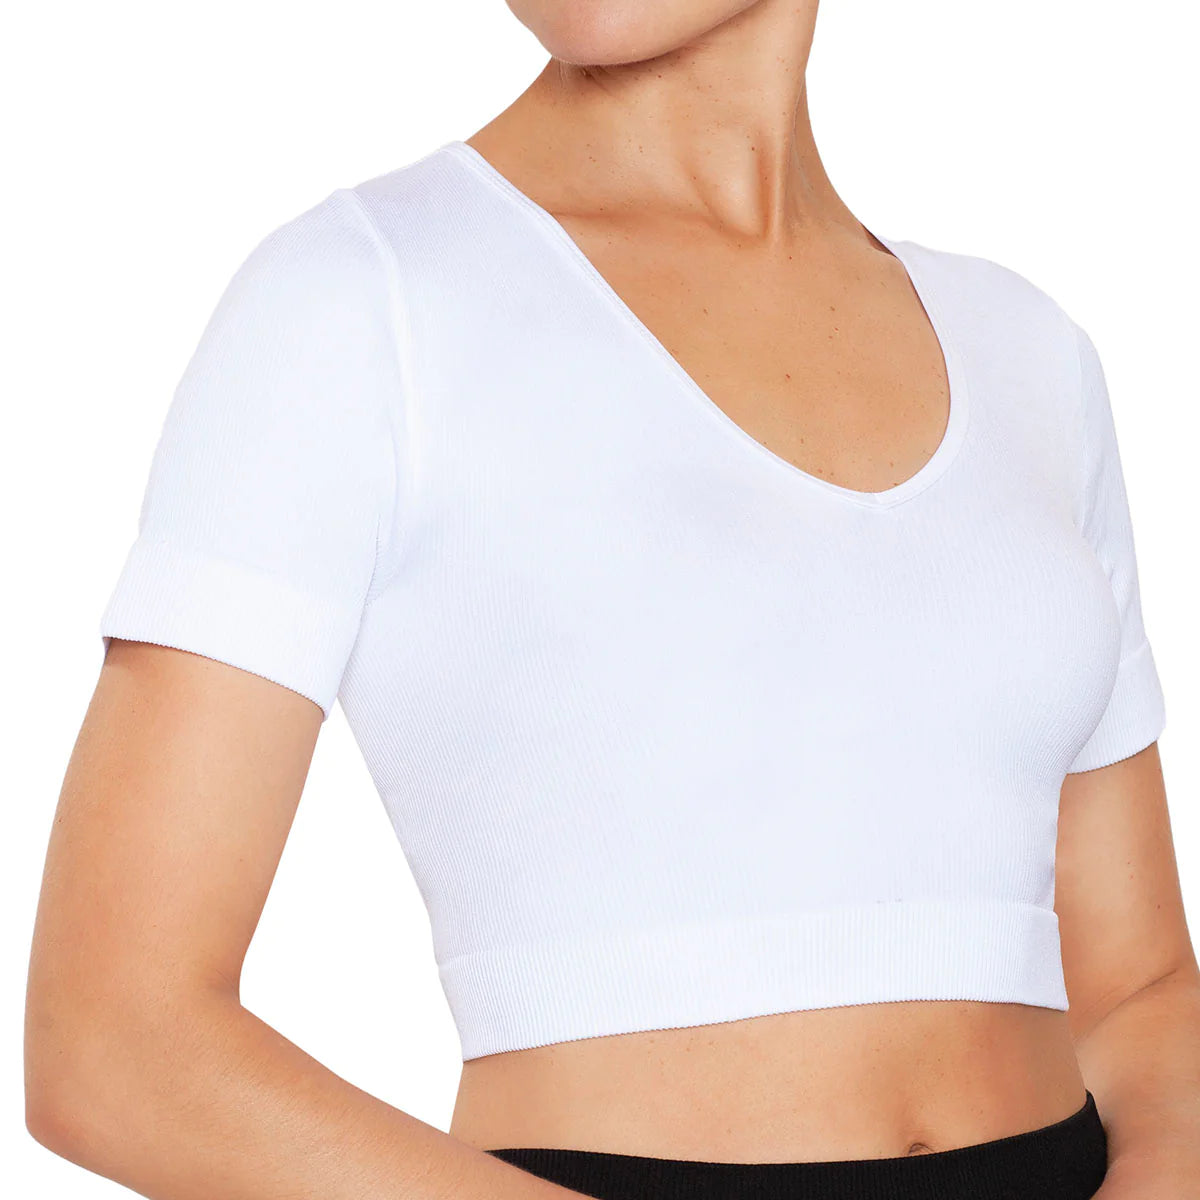 Crop Top - Ribbed Fabric – BEST WEAR - See Through Shirts - Sheer